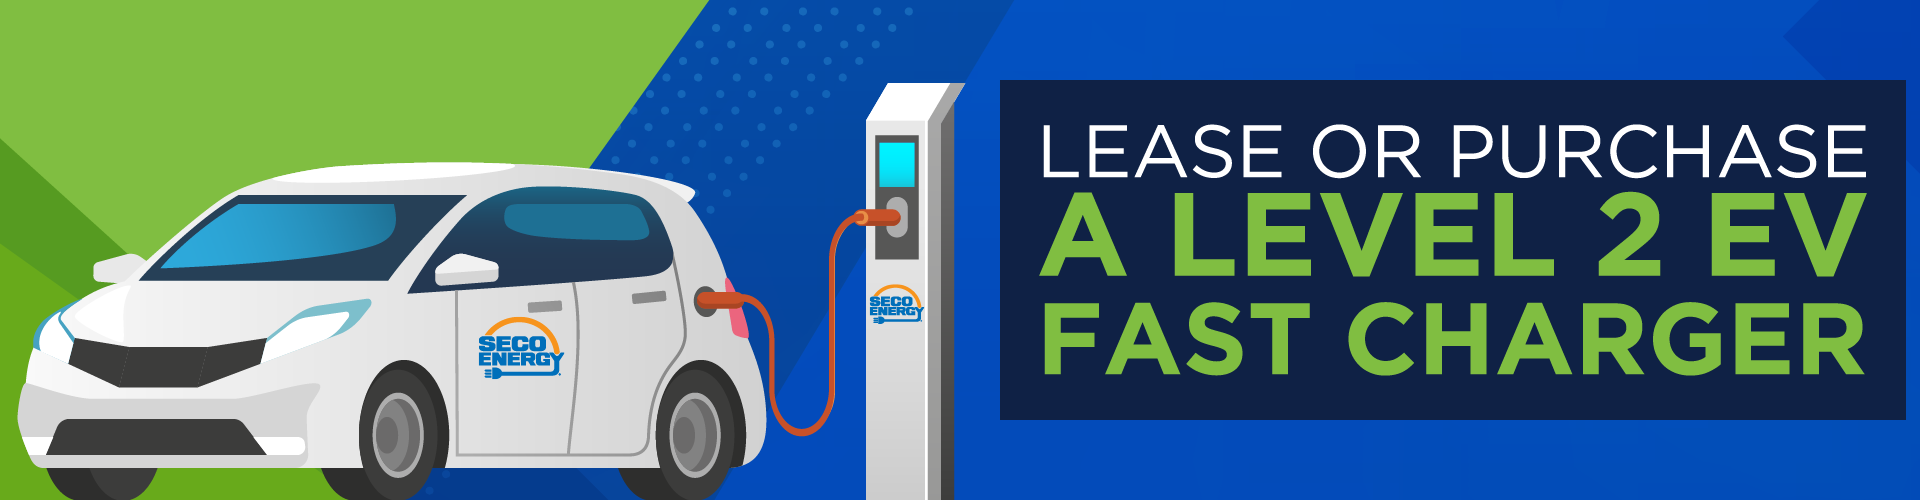 EV charger lease purchase hero